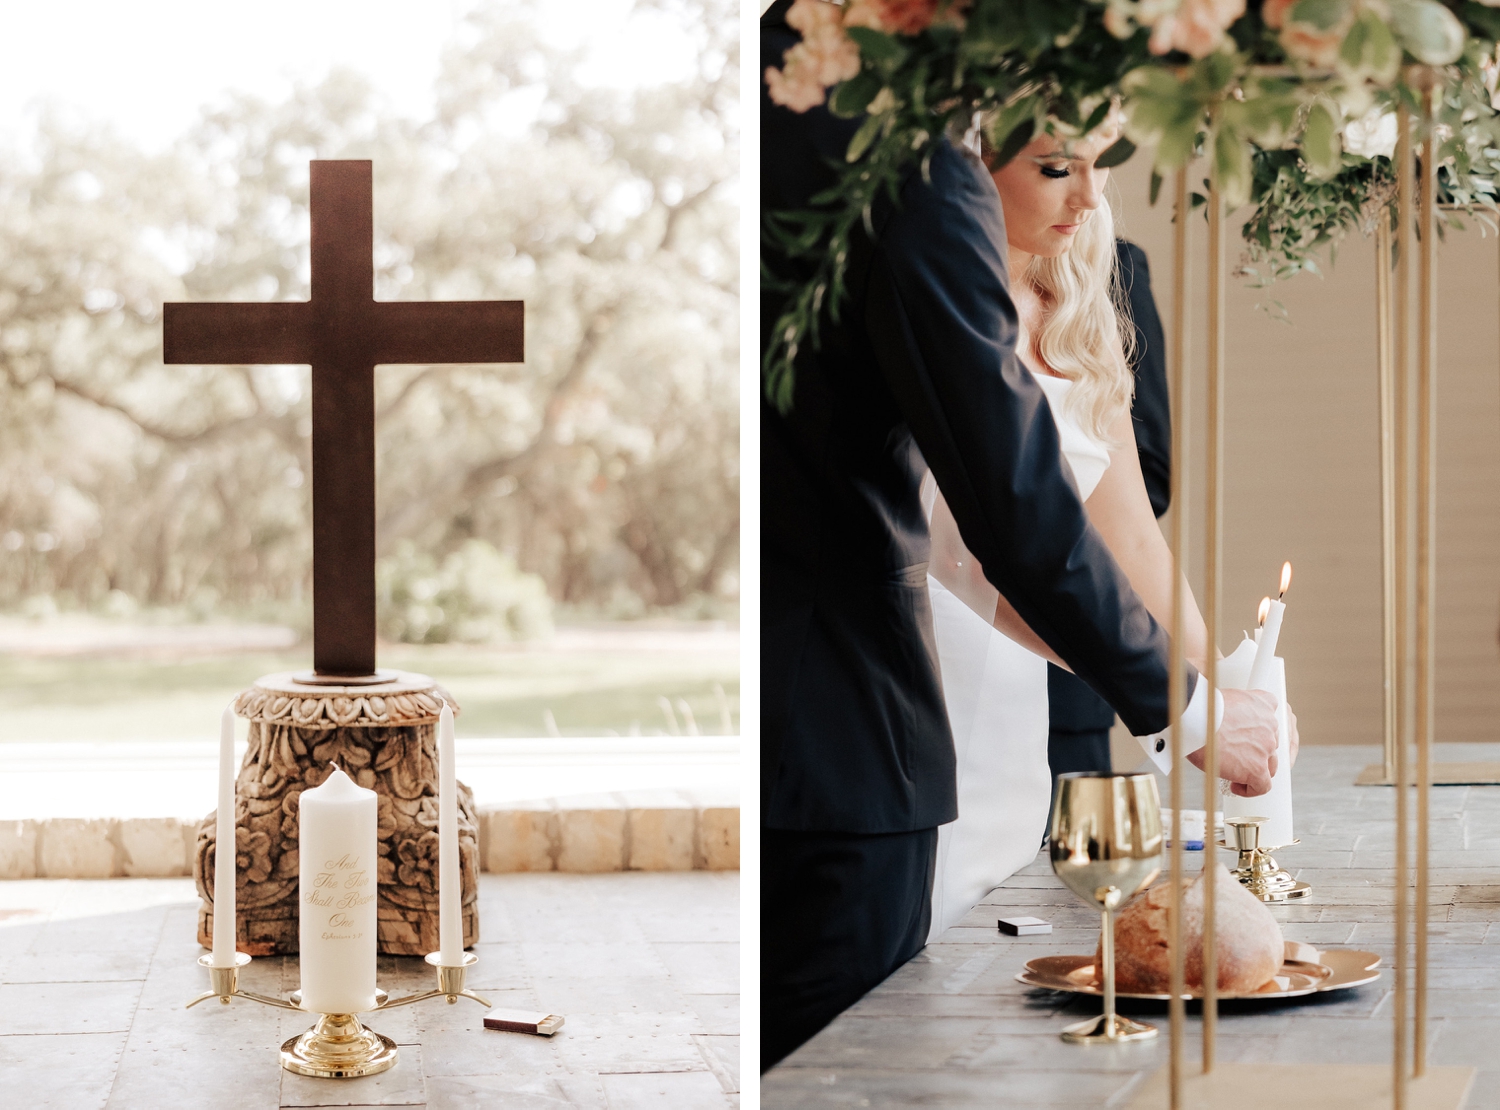 Bride and Groom Lighting a Unity Candle on Wedding Day at The Chandelier of Gruene Chapel | Creating a Wedding Ceremony Unique to You | Central Texas Floral Wedding Designer | Reiley + Rose